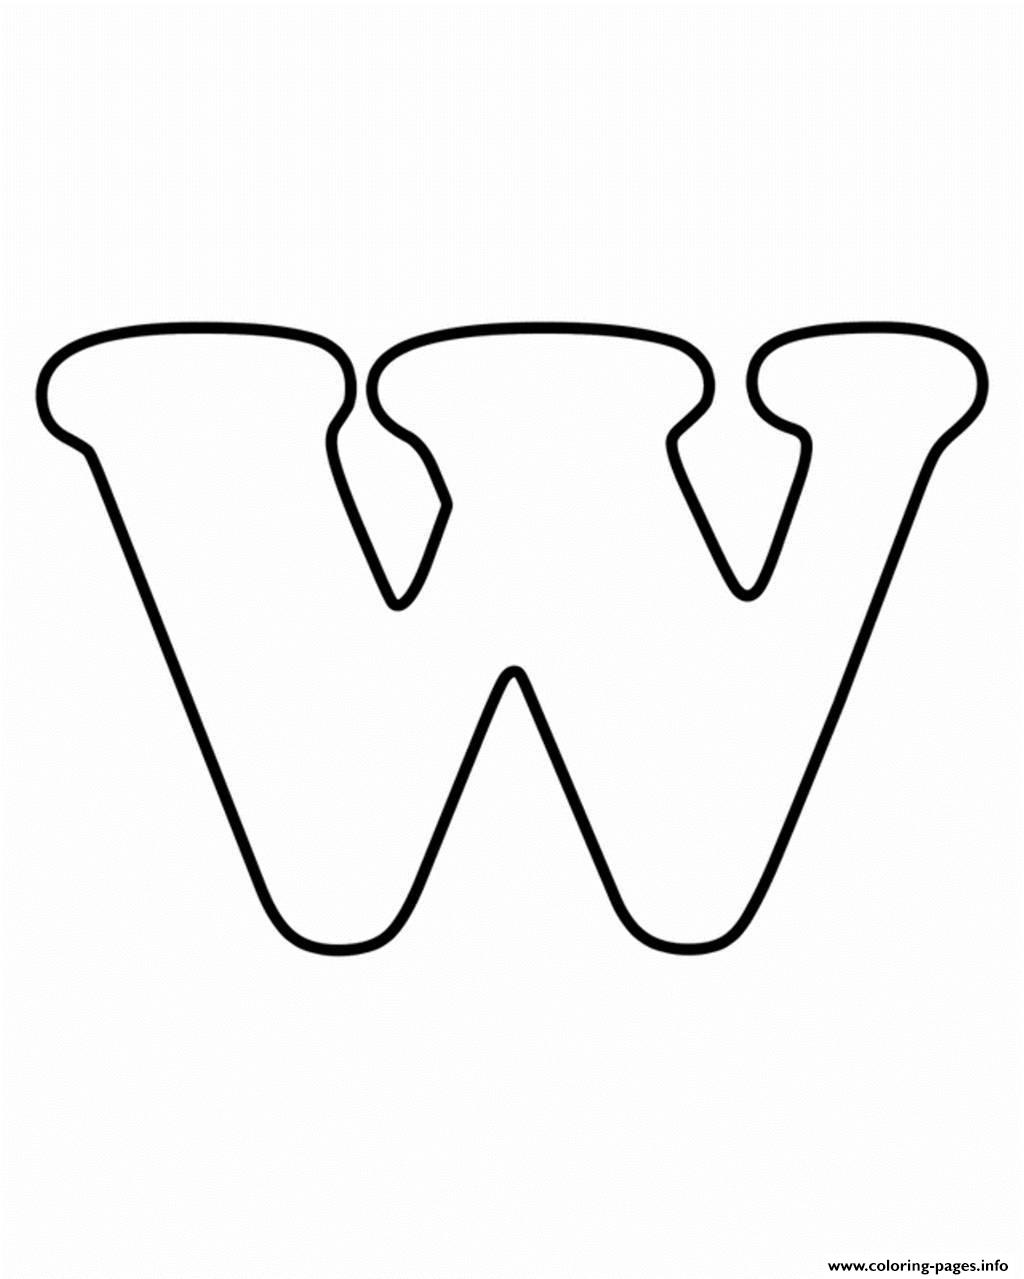 Letter W Free Alphabet S08f5 Coloring page Printable